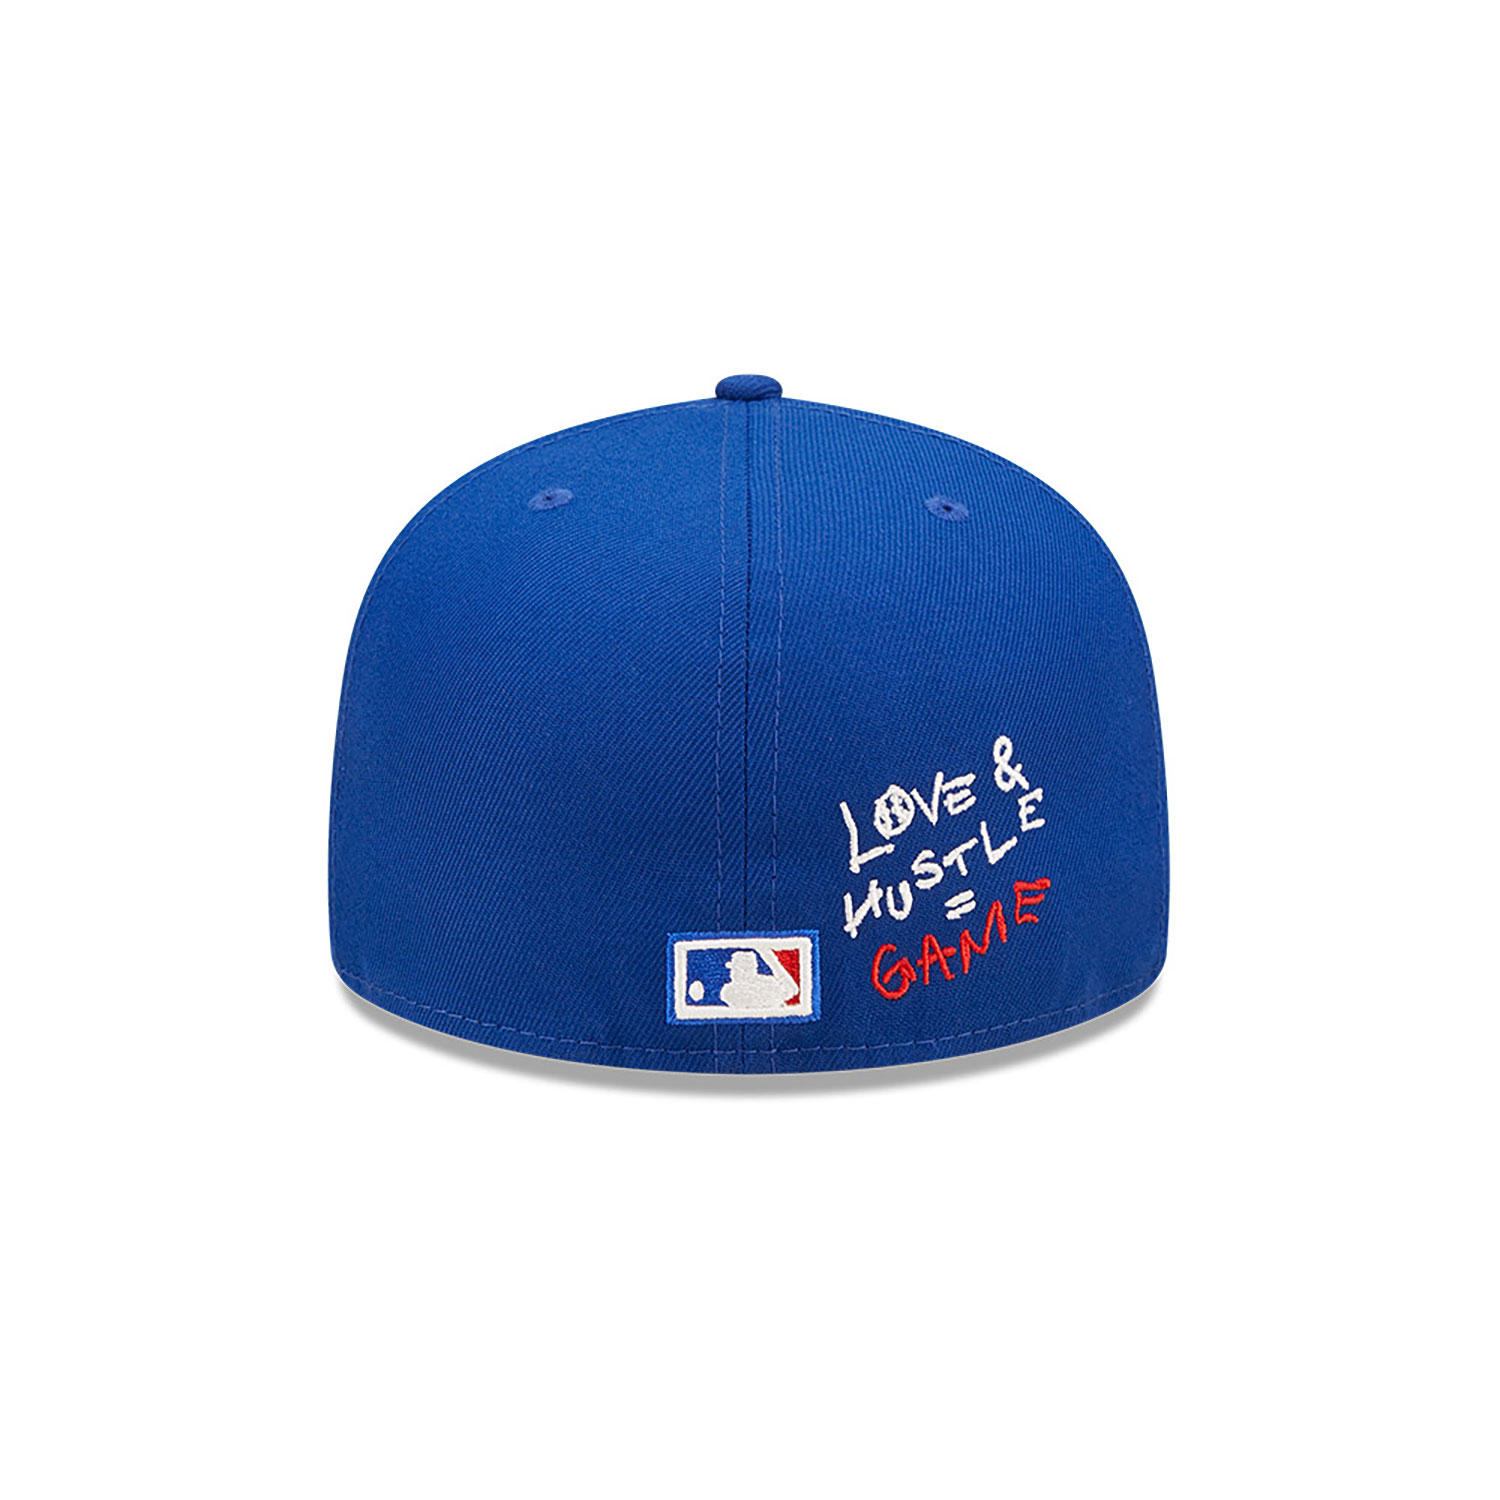 Toronto Blue Jays MLB Team Heart Blue 59FIFTY Fitted Cap